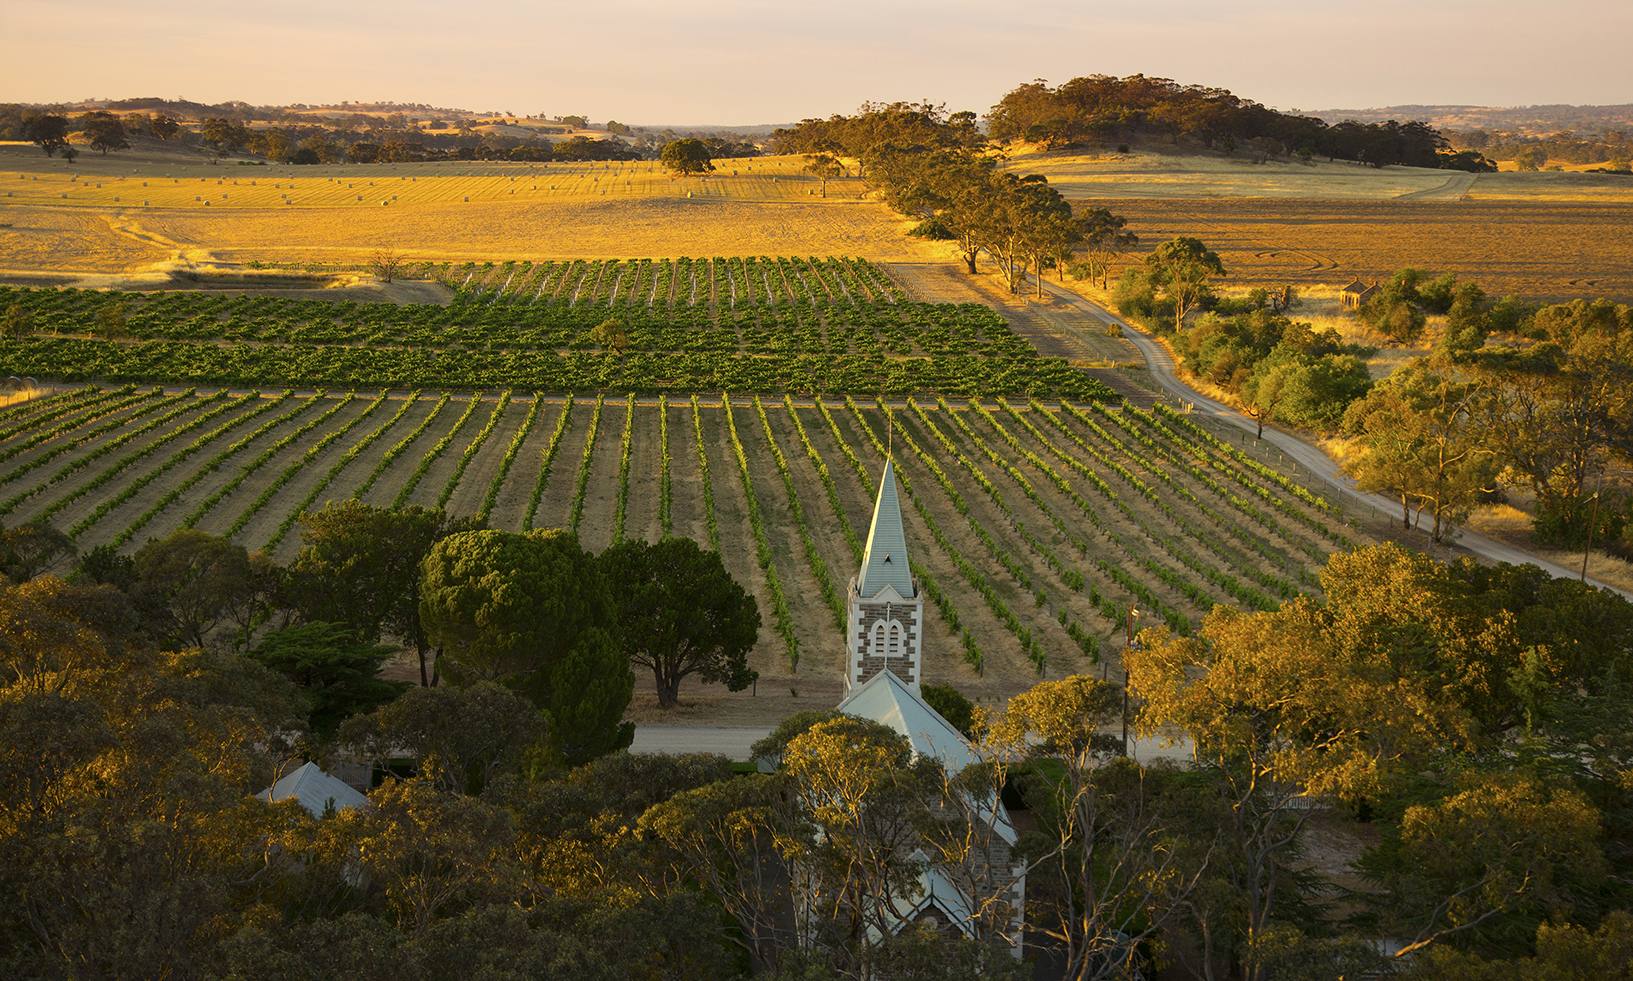 The Hill of Grace vineyard in the Barossa